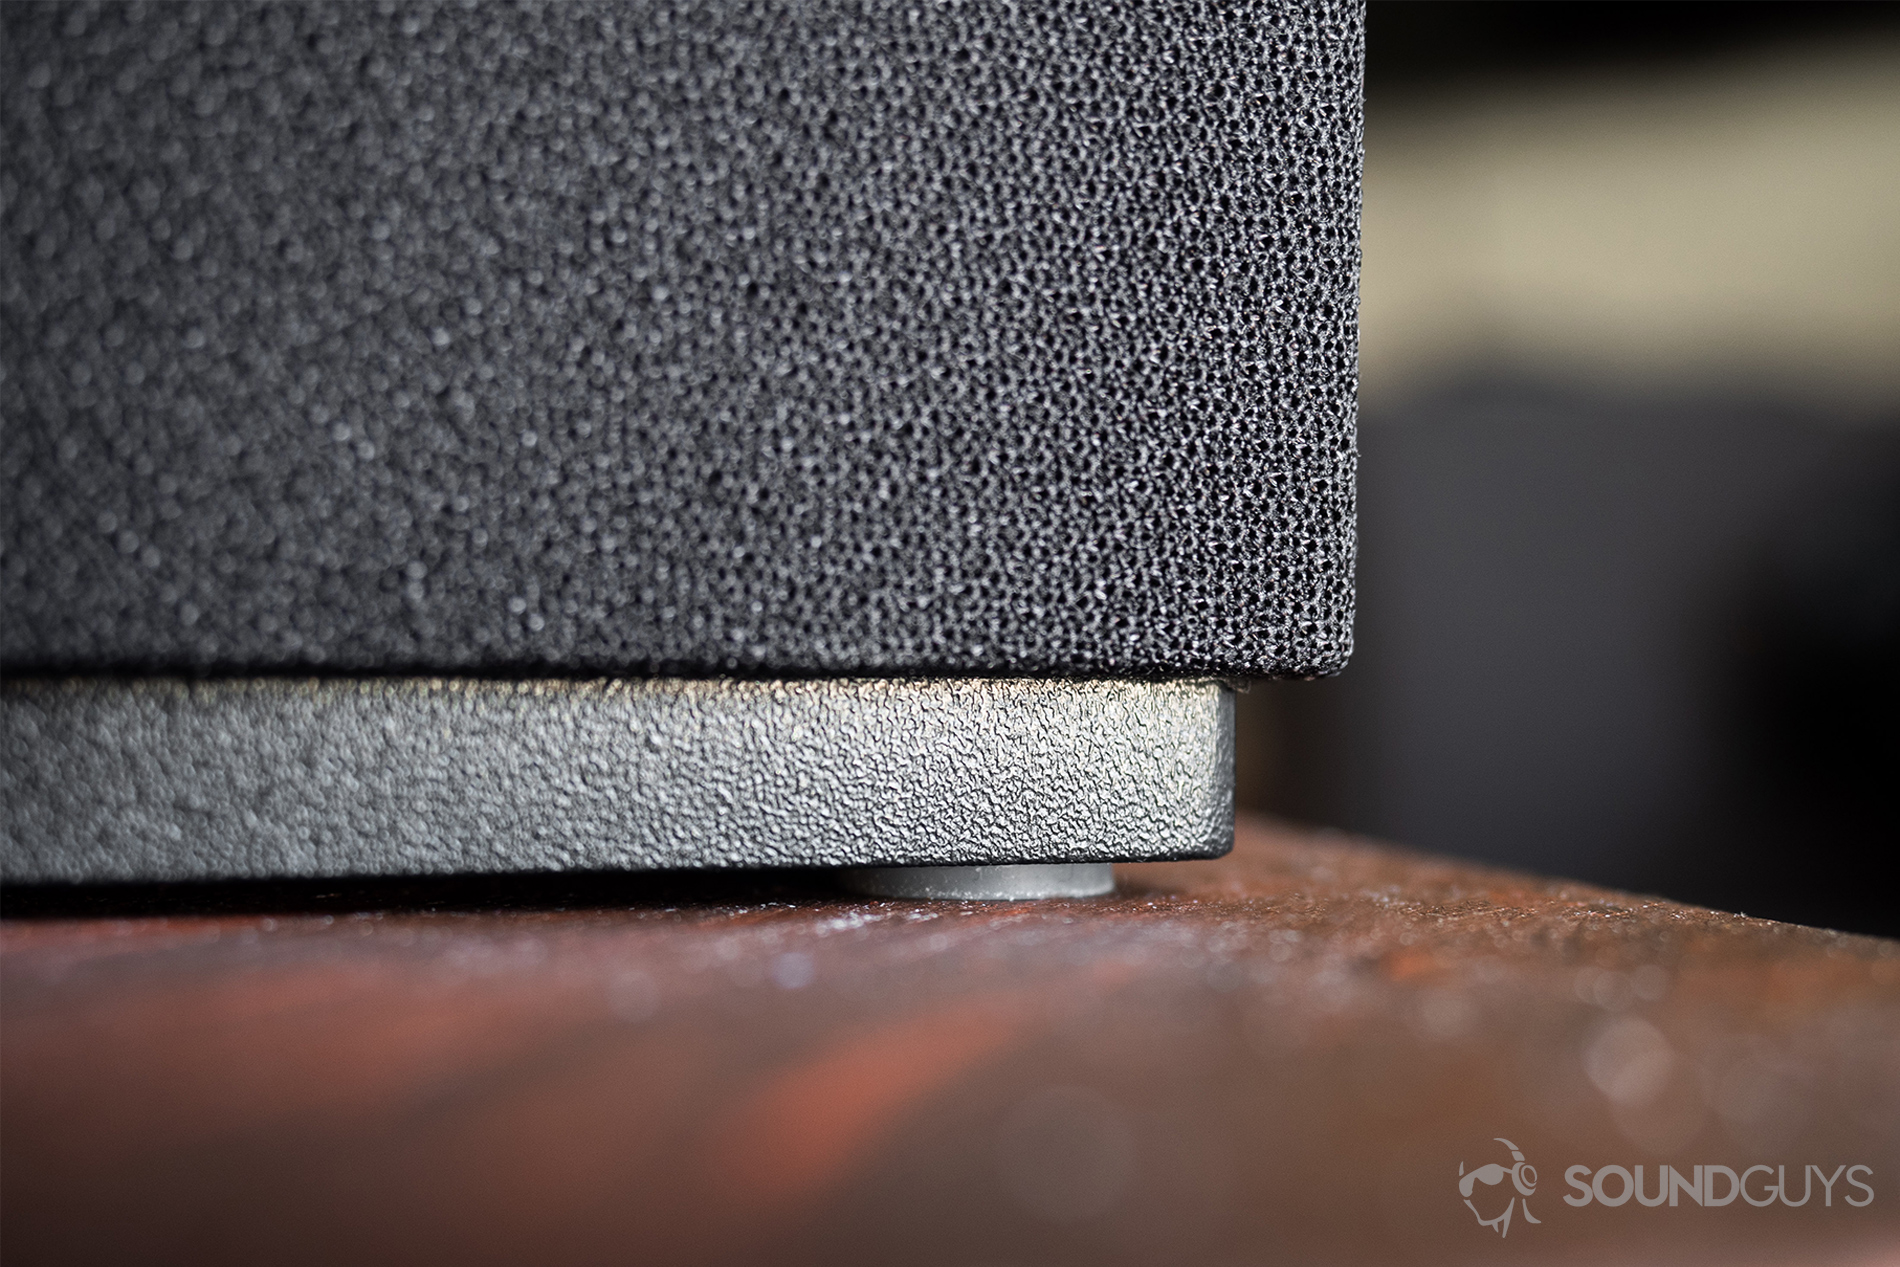 Solis SO-7000 review: The speakers on a table, a close-up of the rubber foot.